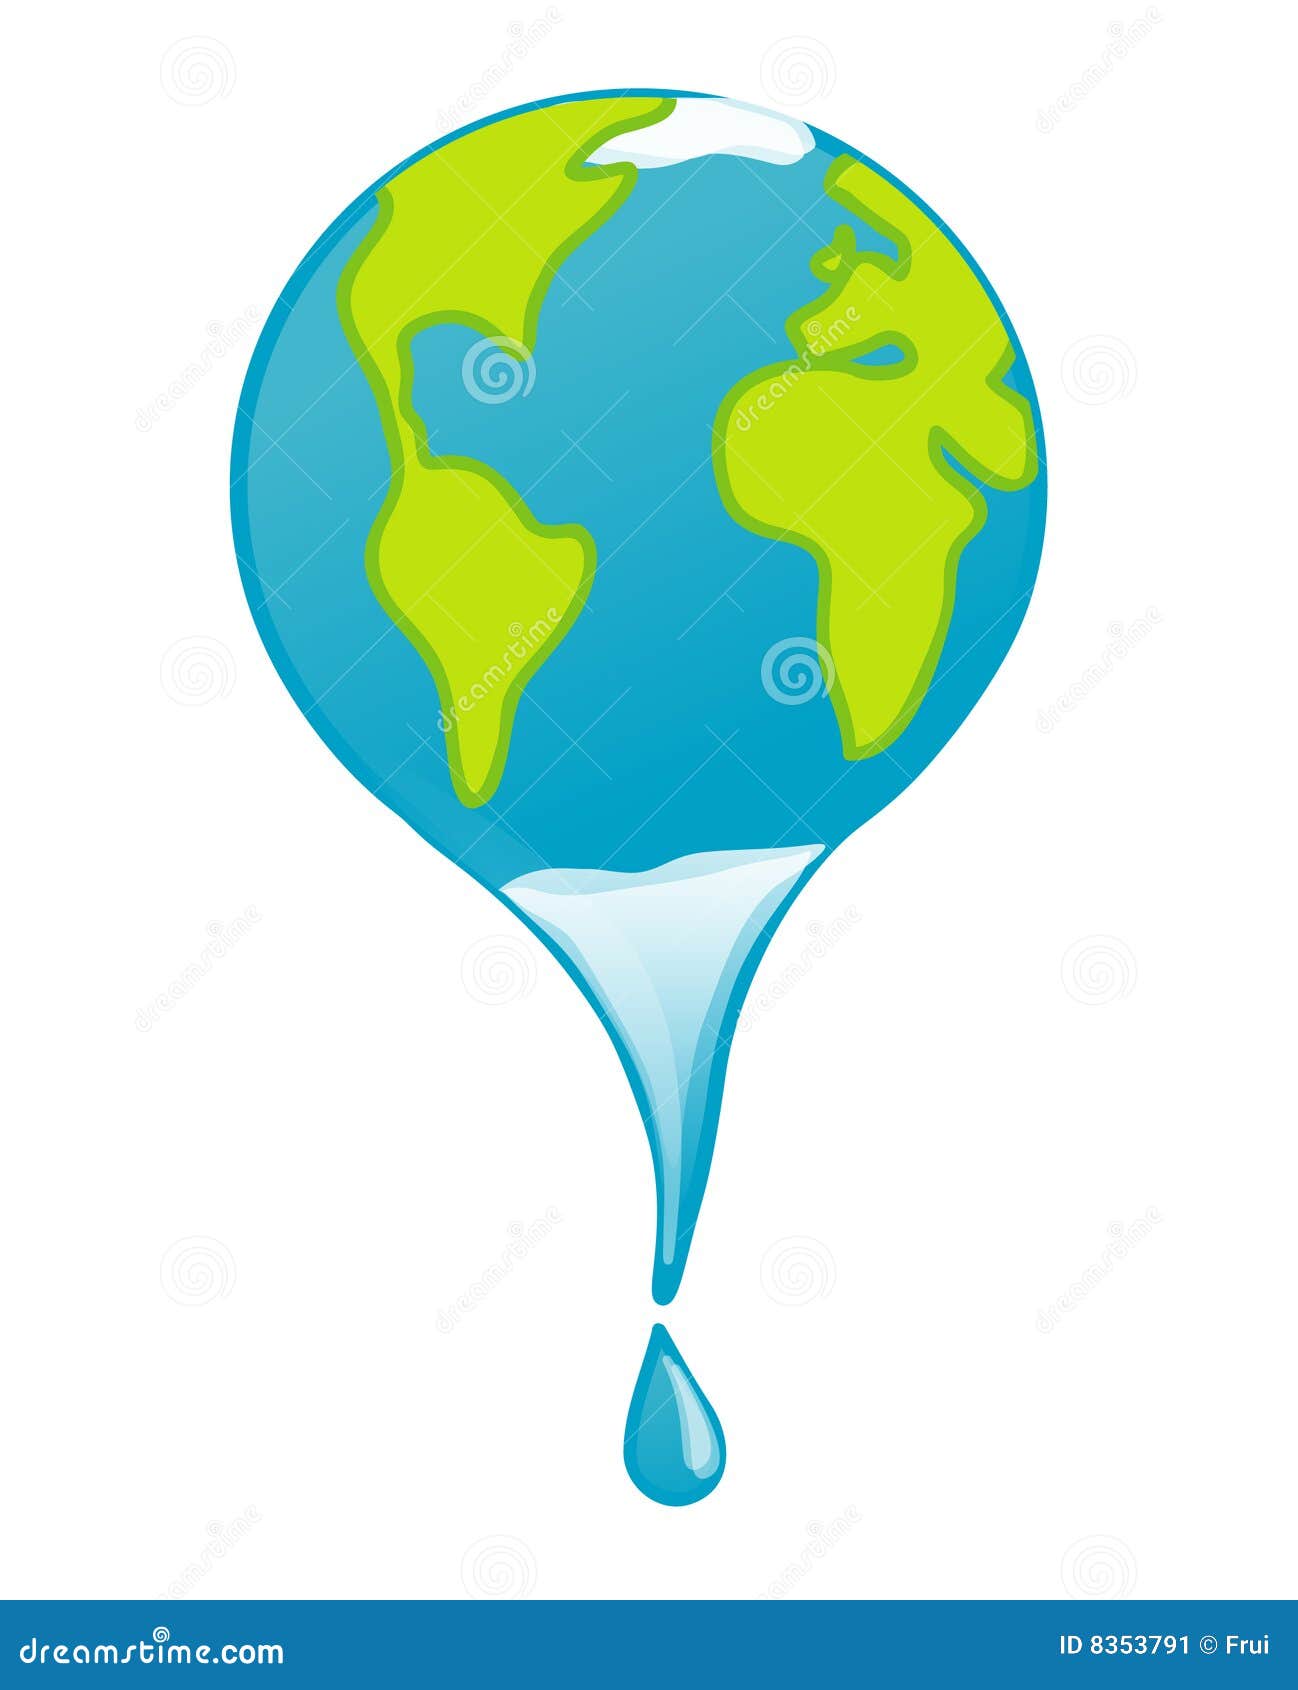 global warming clipart - photo #36